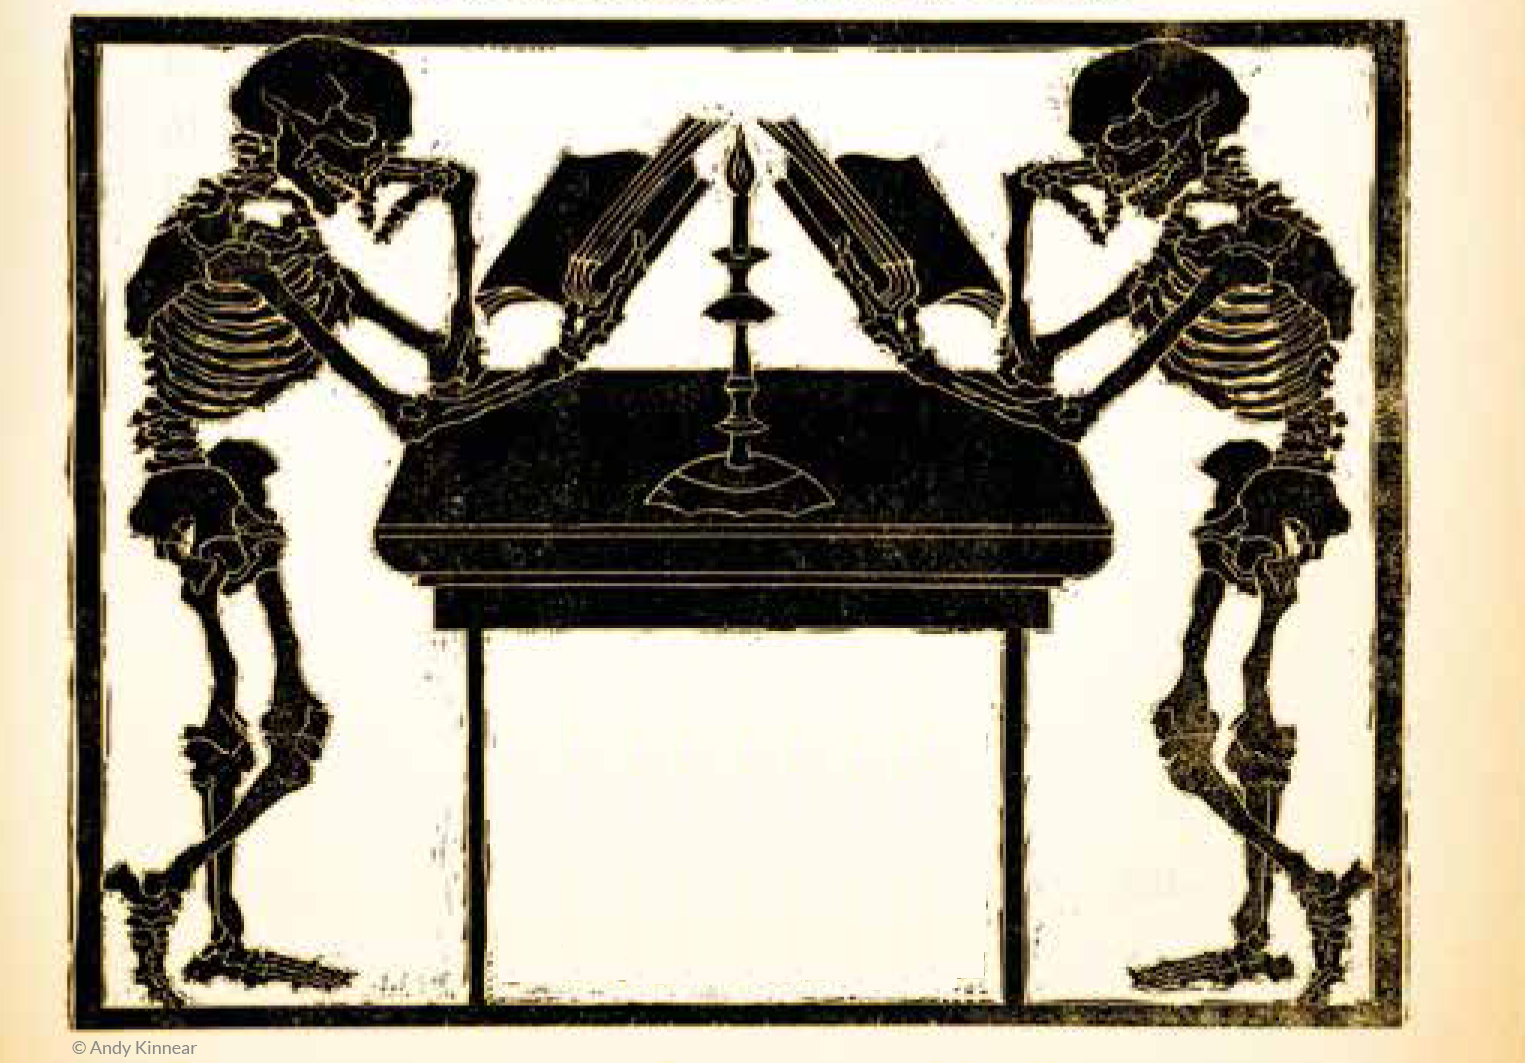 Cover image from Ballad Tales by Kevan Manwaring: Two skeletons reading at a desk